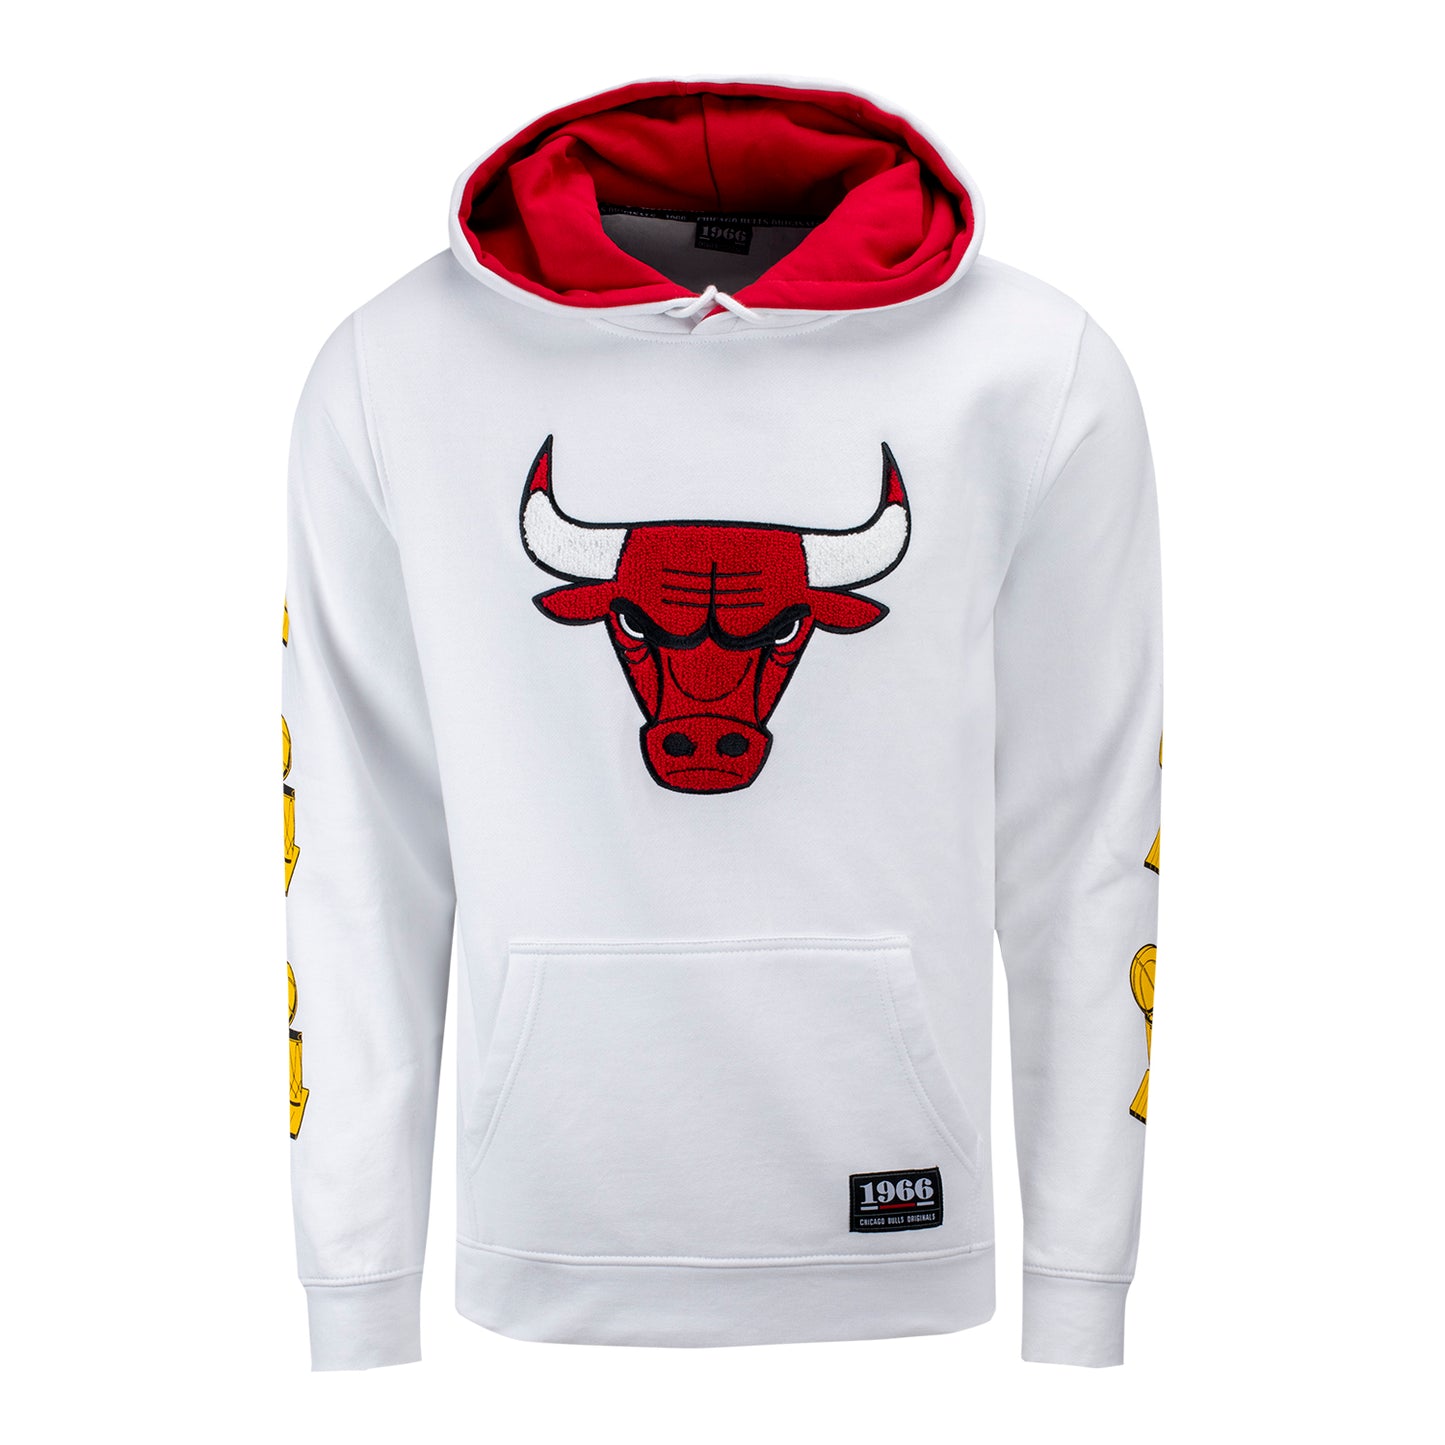 Chicago Bulls 1966 6x White Hooded Sweatshirt in white - front view